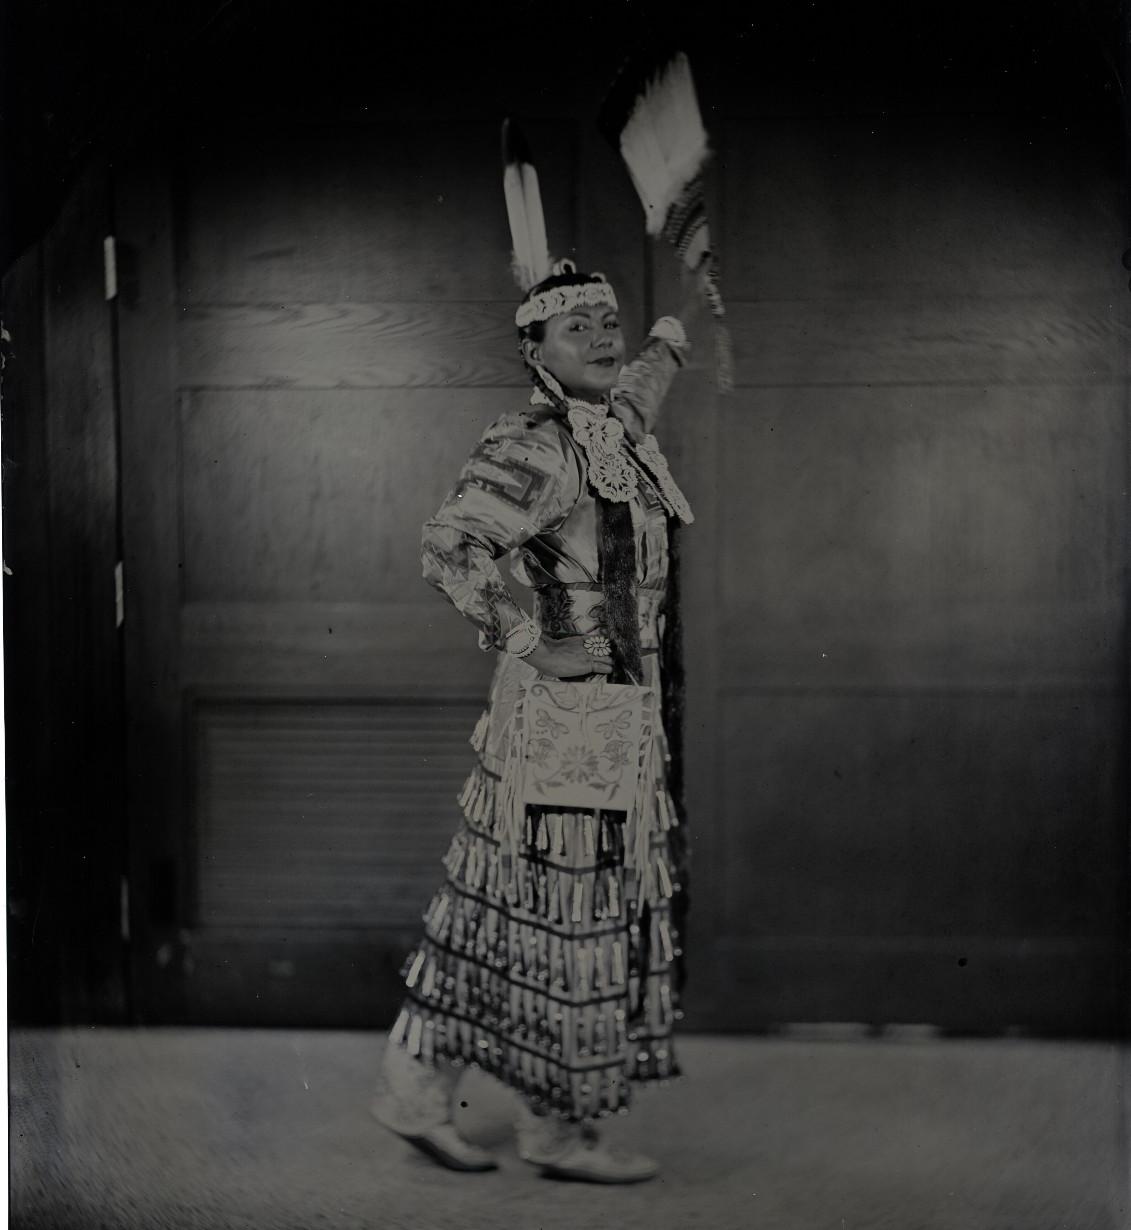 Will Wilson, Diné, b. 1969, "Talking Tintype, Madrienne Salgado, Jingle Dress Dancer/Government and Public Relations Manager for the Muckleshoot Indian Tribe, Citizen of the Muckleshoot Nation," 2018